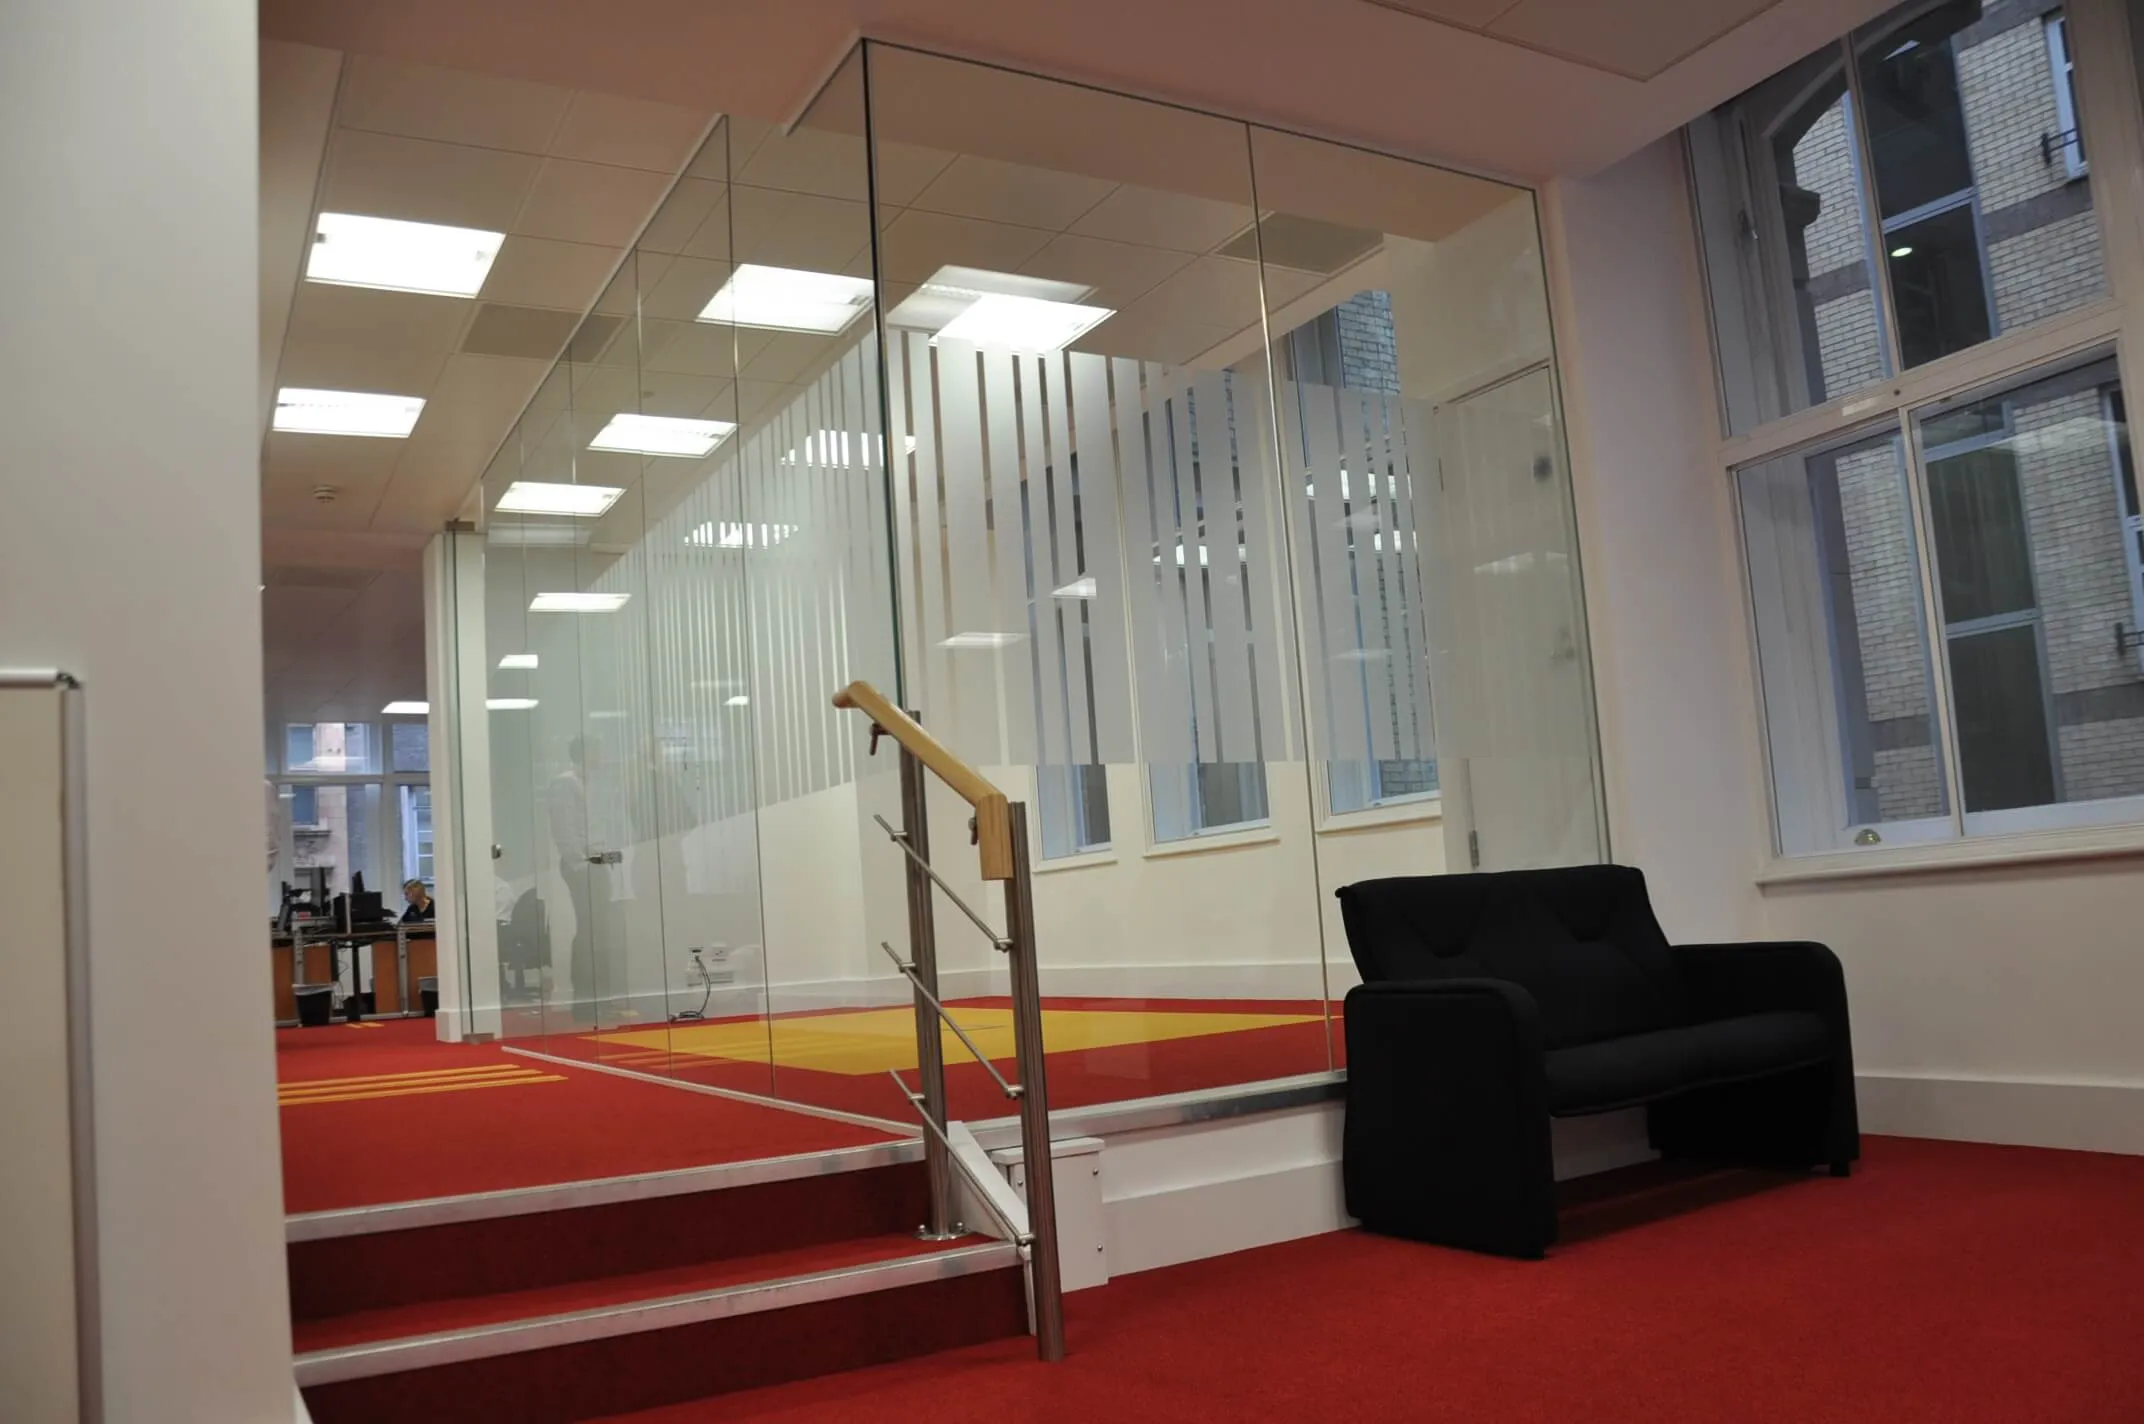 Small stairs sofa and glass partition with designer manifestation on it